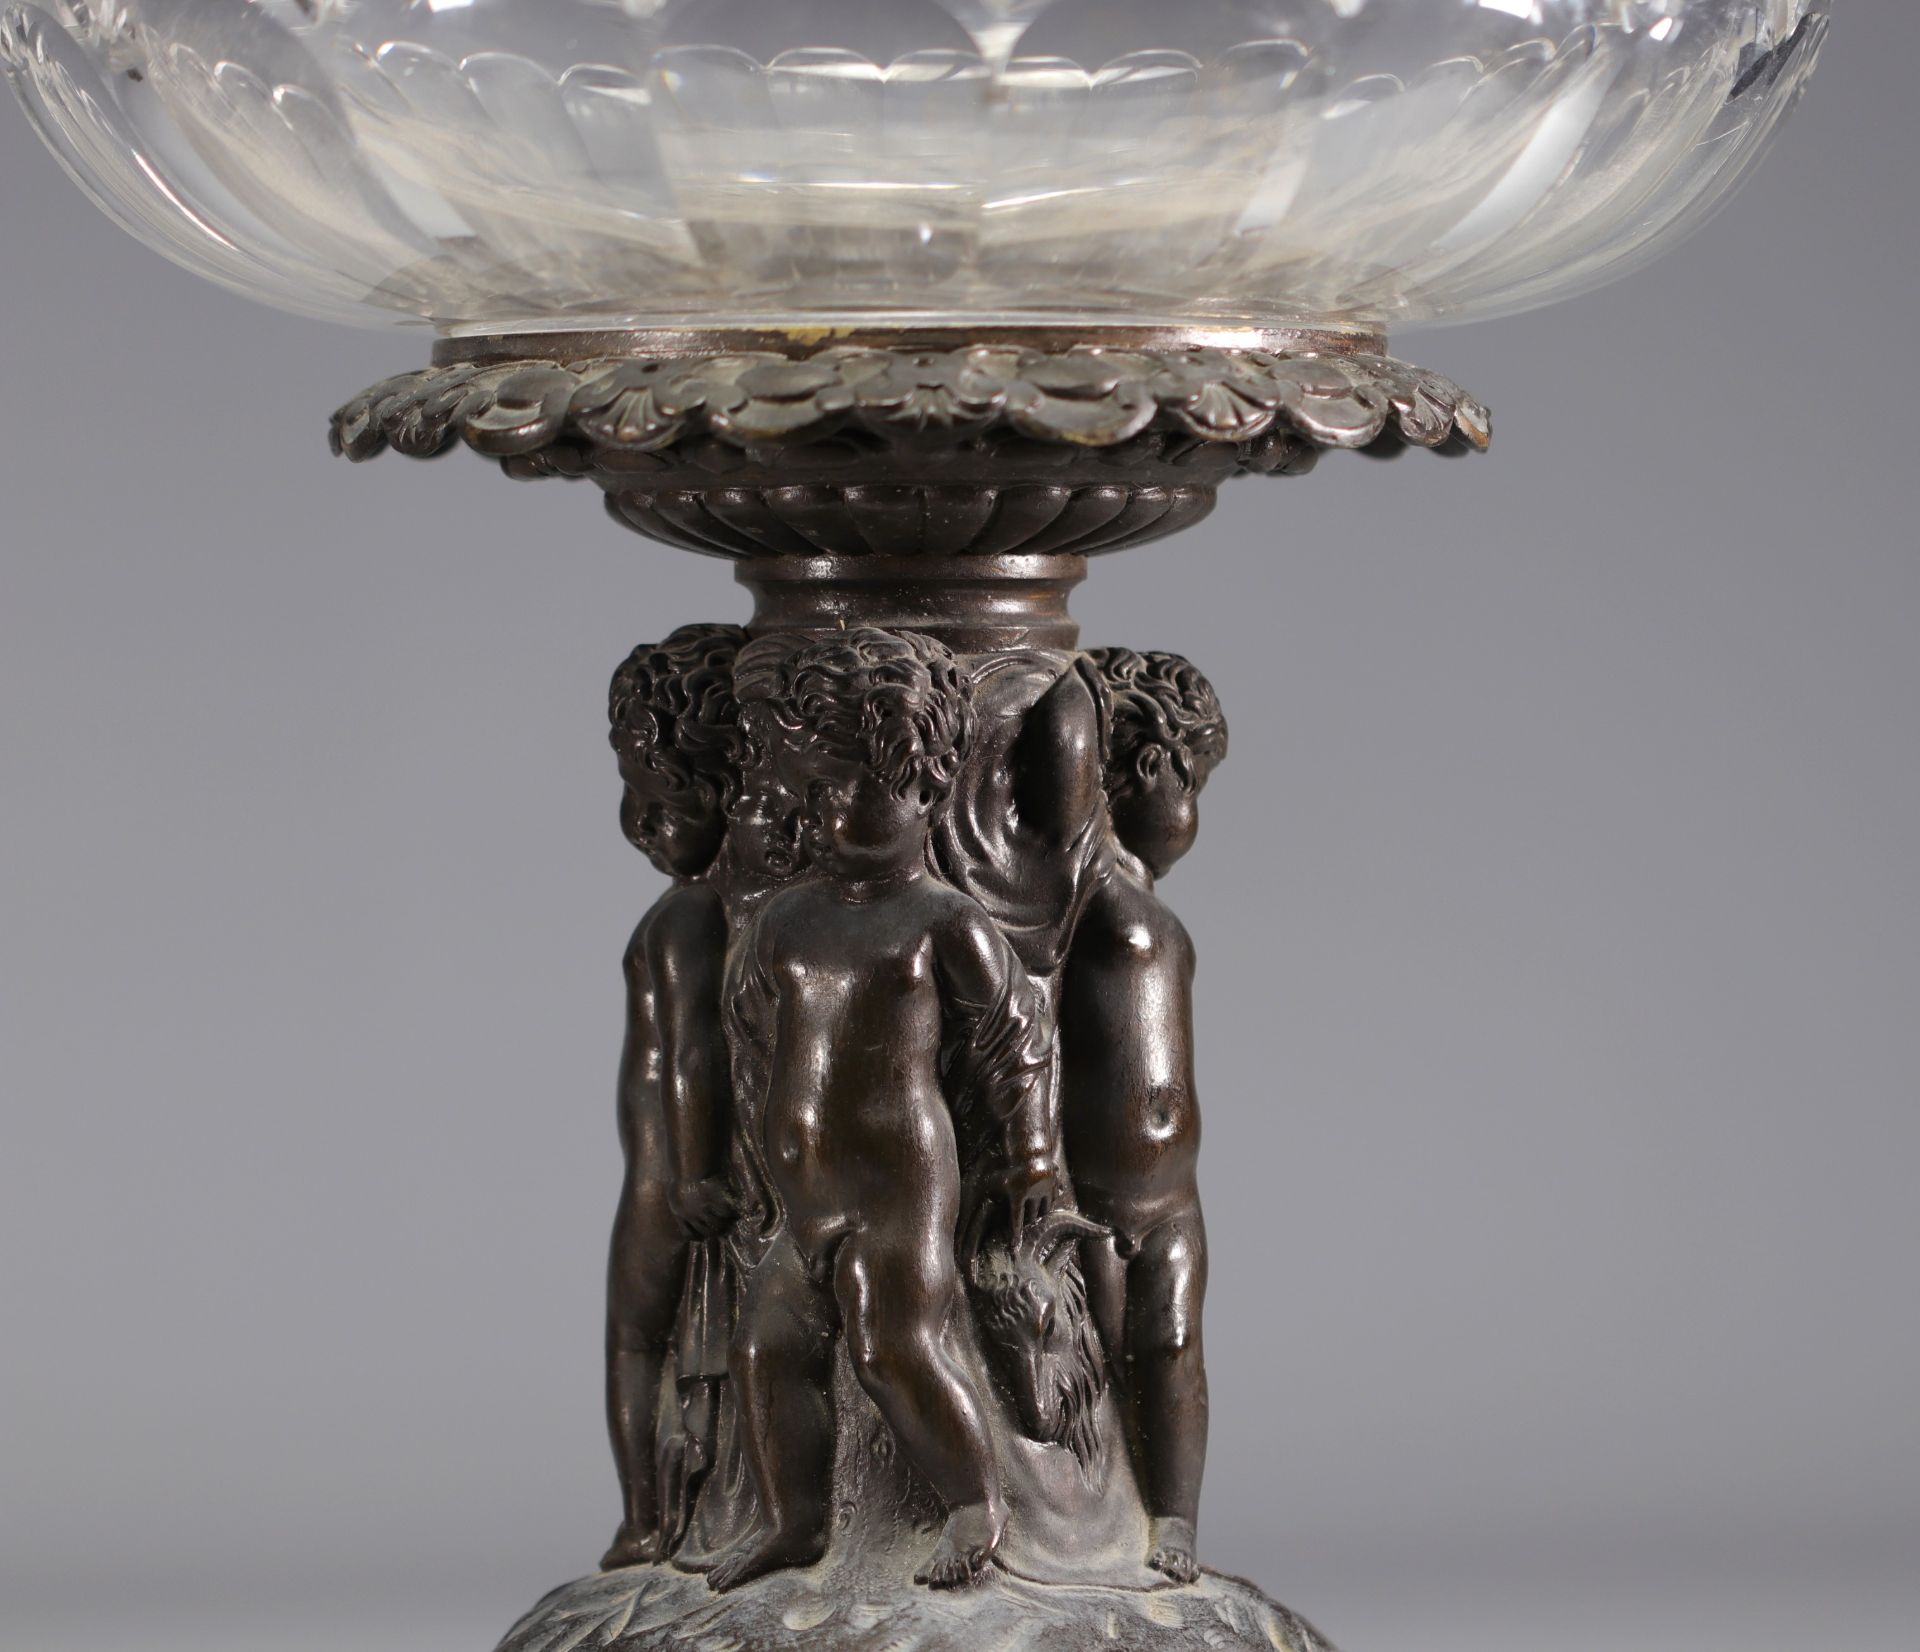 (2) Pair of large crystal bowls on bronze feet depicting a group of children from 19th century - Image 3 of 3